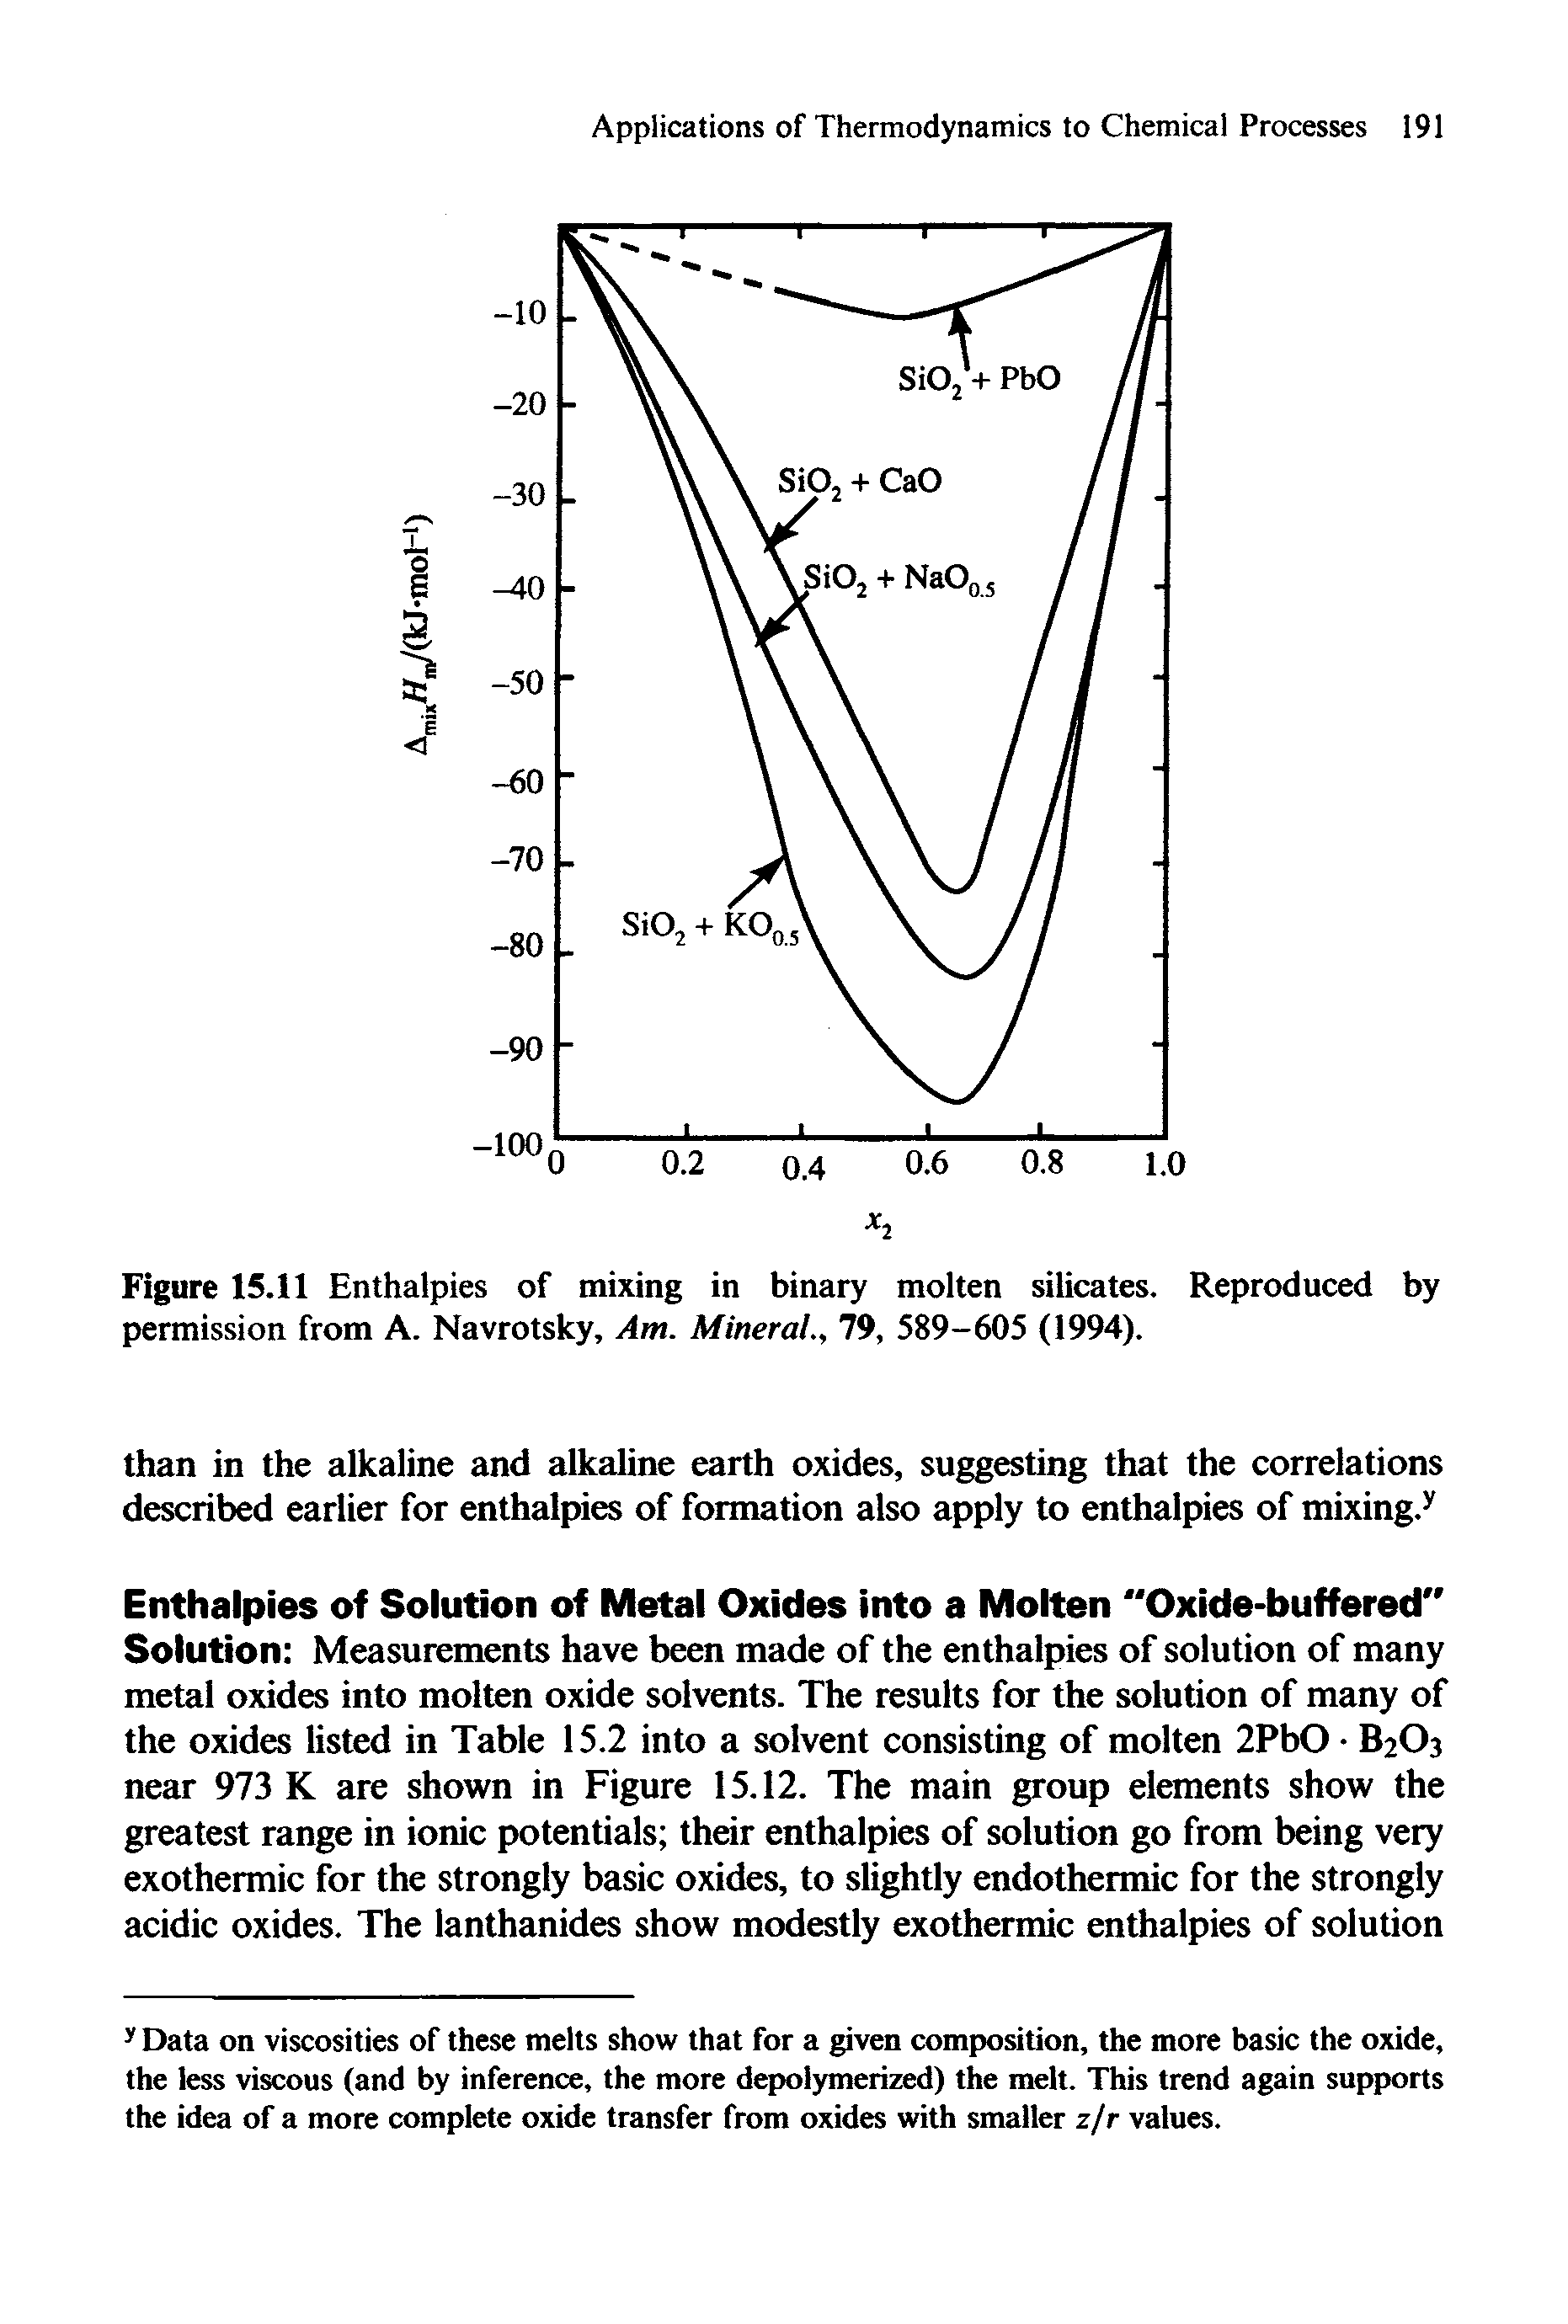 Figure 15.11 Enthalpies of mixing in binary molten silicates. Reproduced by permission from A. Navrotsky, Am. Mineral., 79, 589-605 (1994).